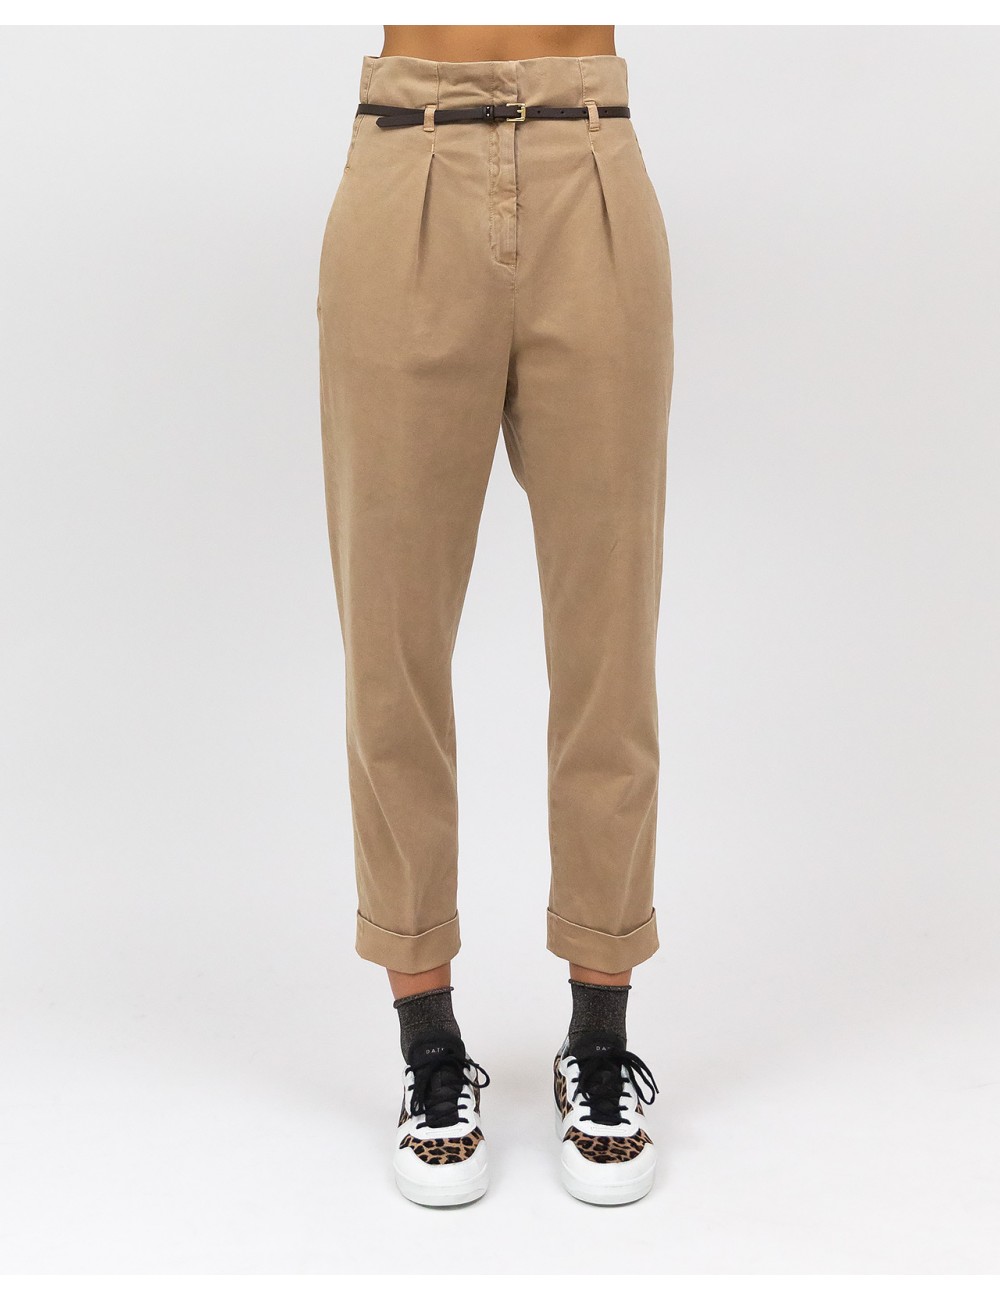 Slacks and Chinos Womens Trousers Grey Peserico Cotton Trouser in Light Grey Slacks and Chinos Peserico Trousers 